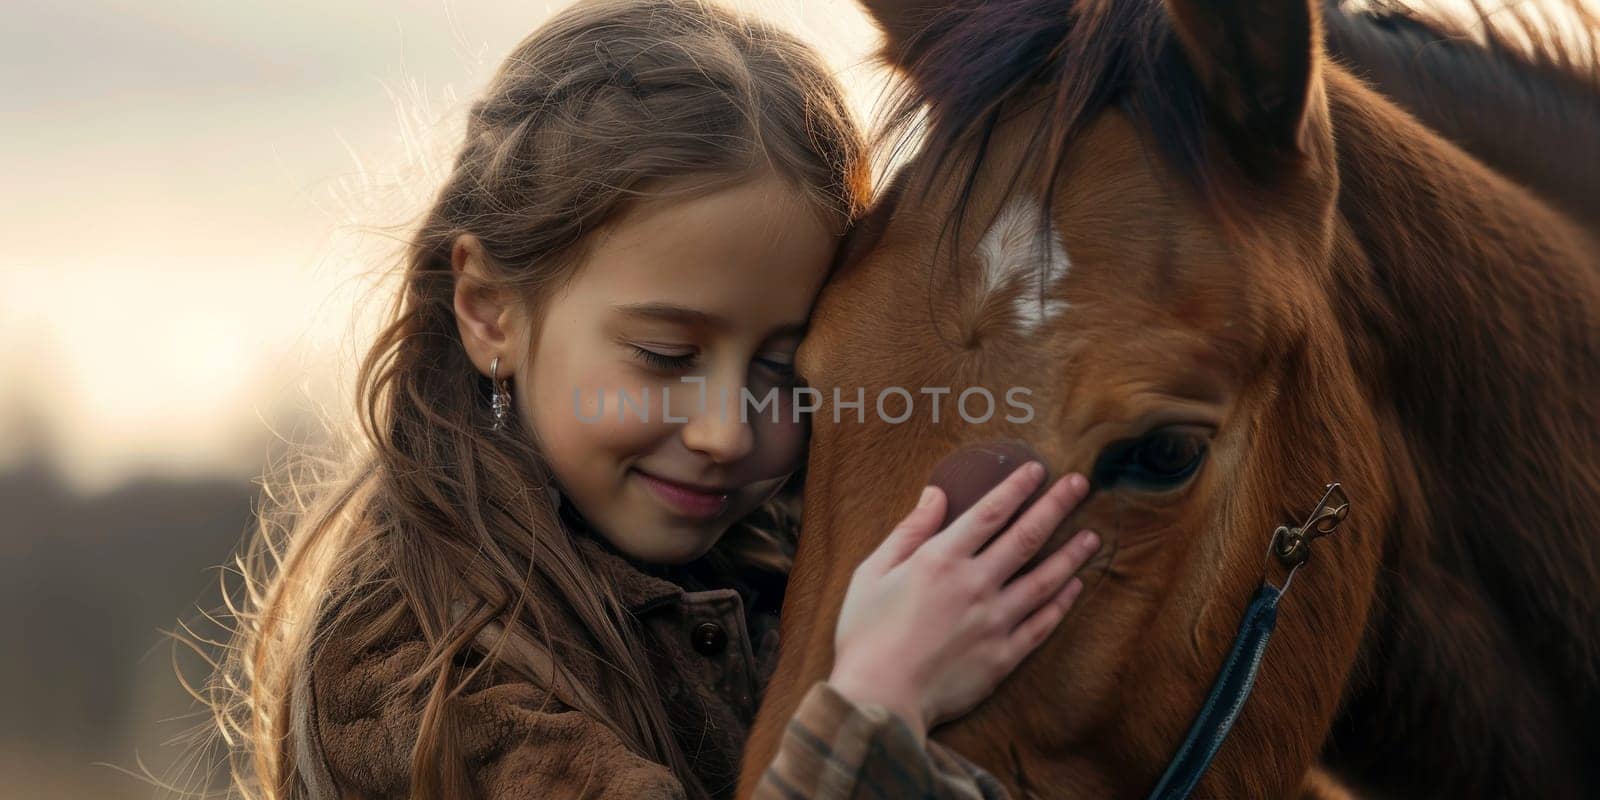 Young girl and horse they hug each other, animal love concept by Kadula